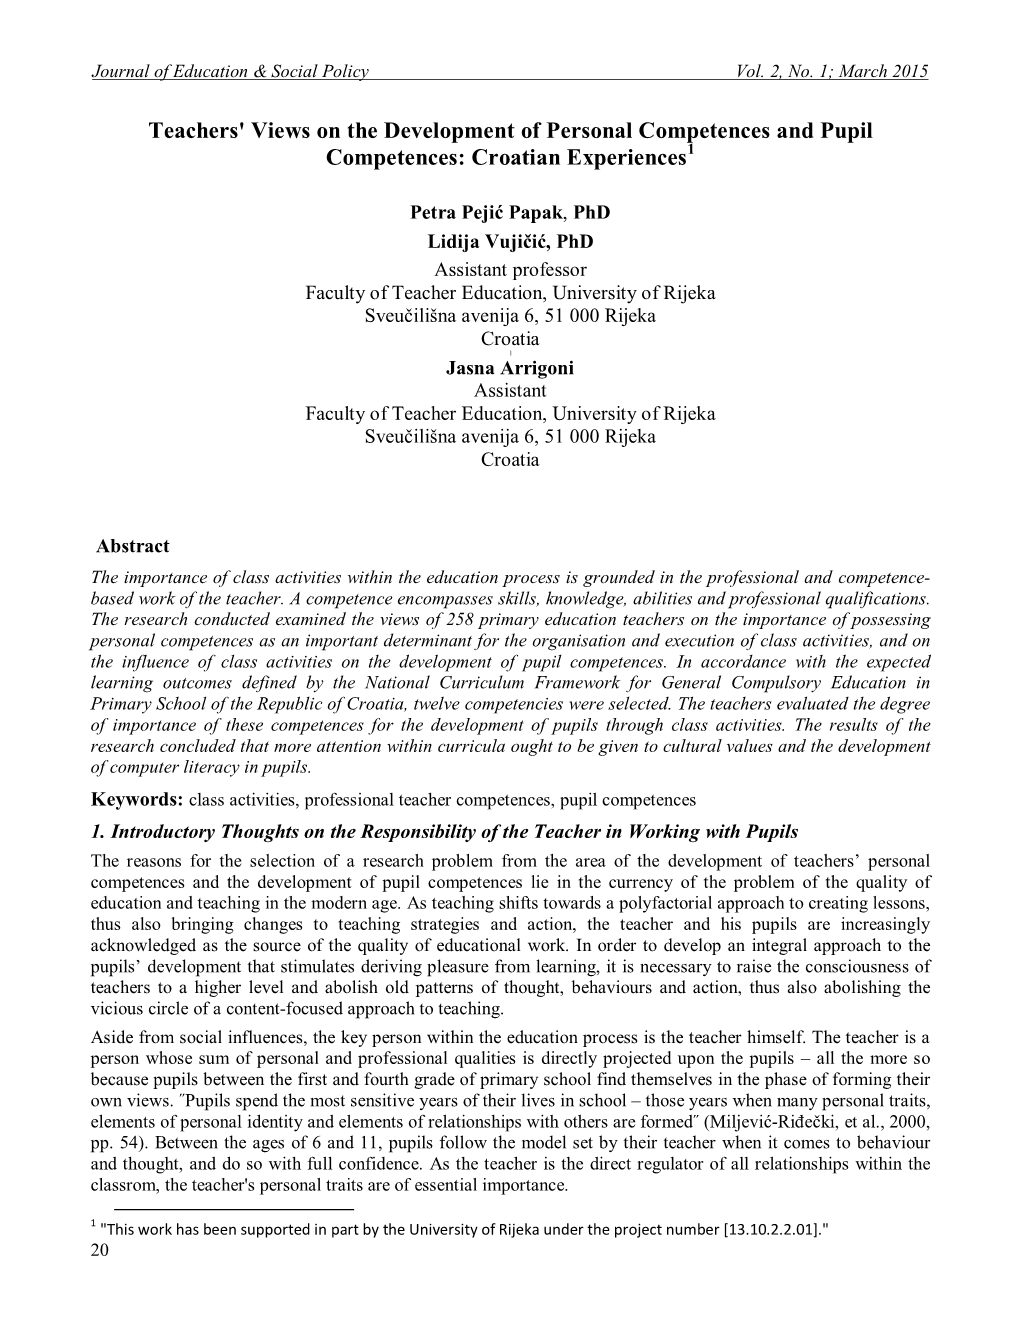 Teachers' Views on the Development of Personal Competences and Pupil Competences: Croatian Experiences1